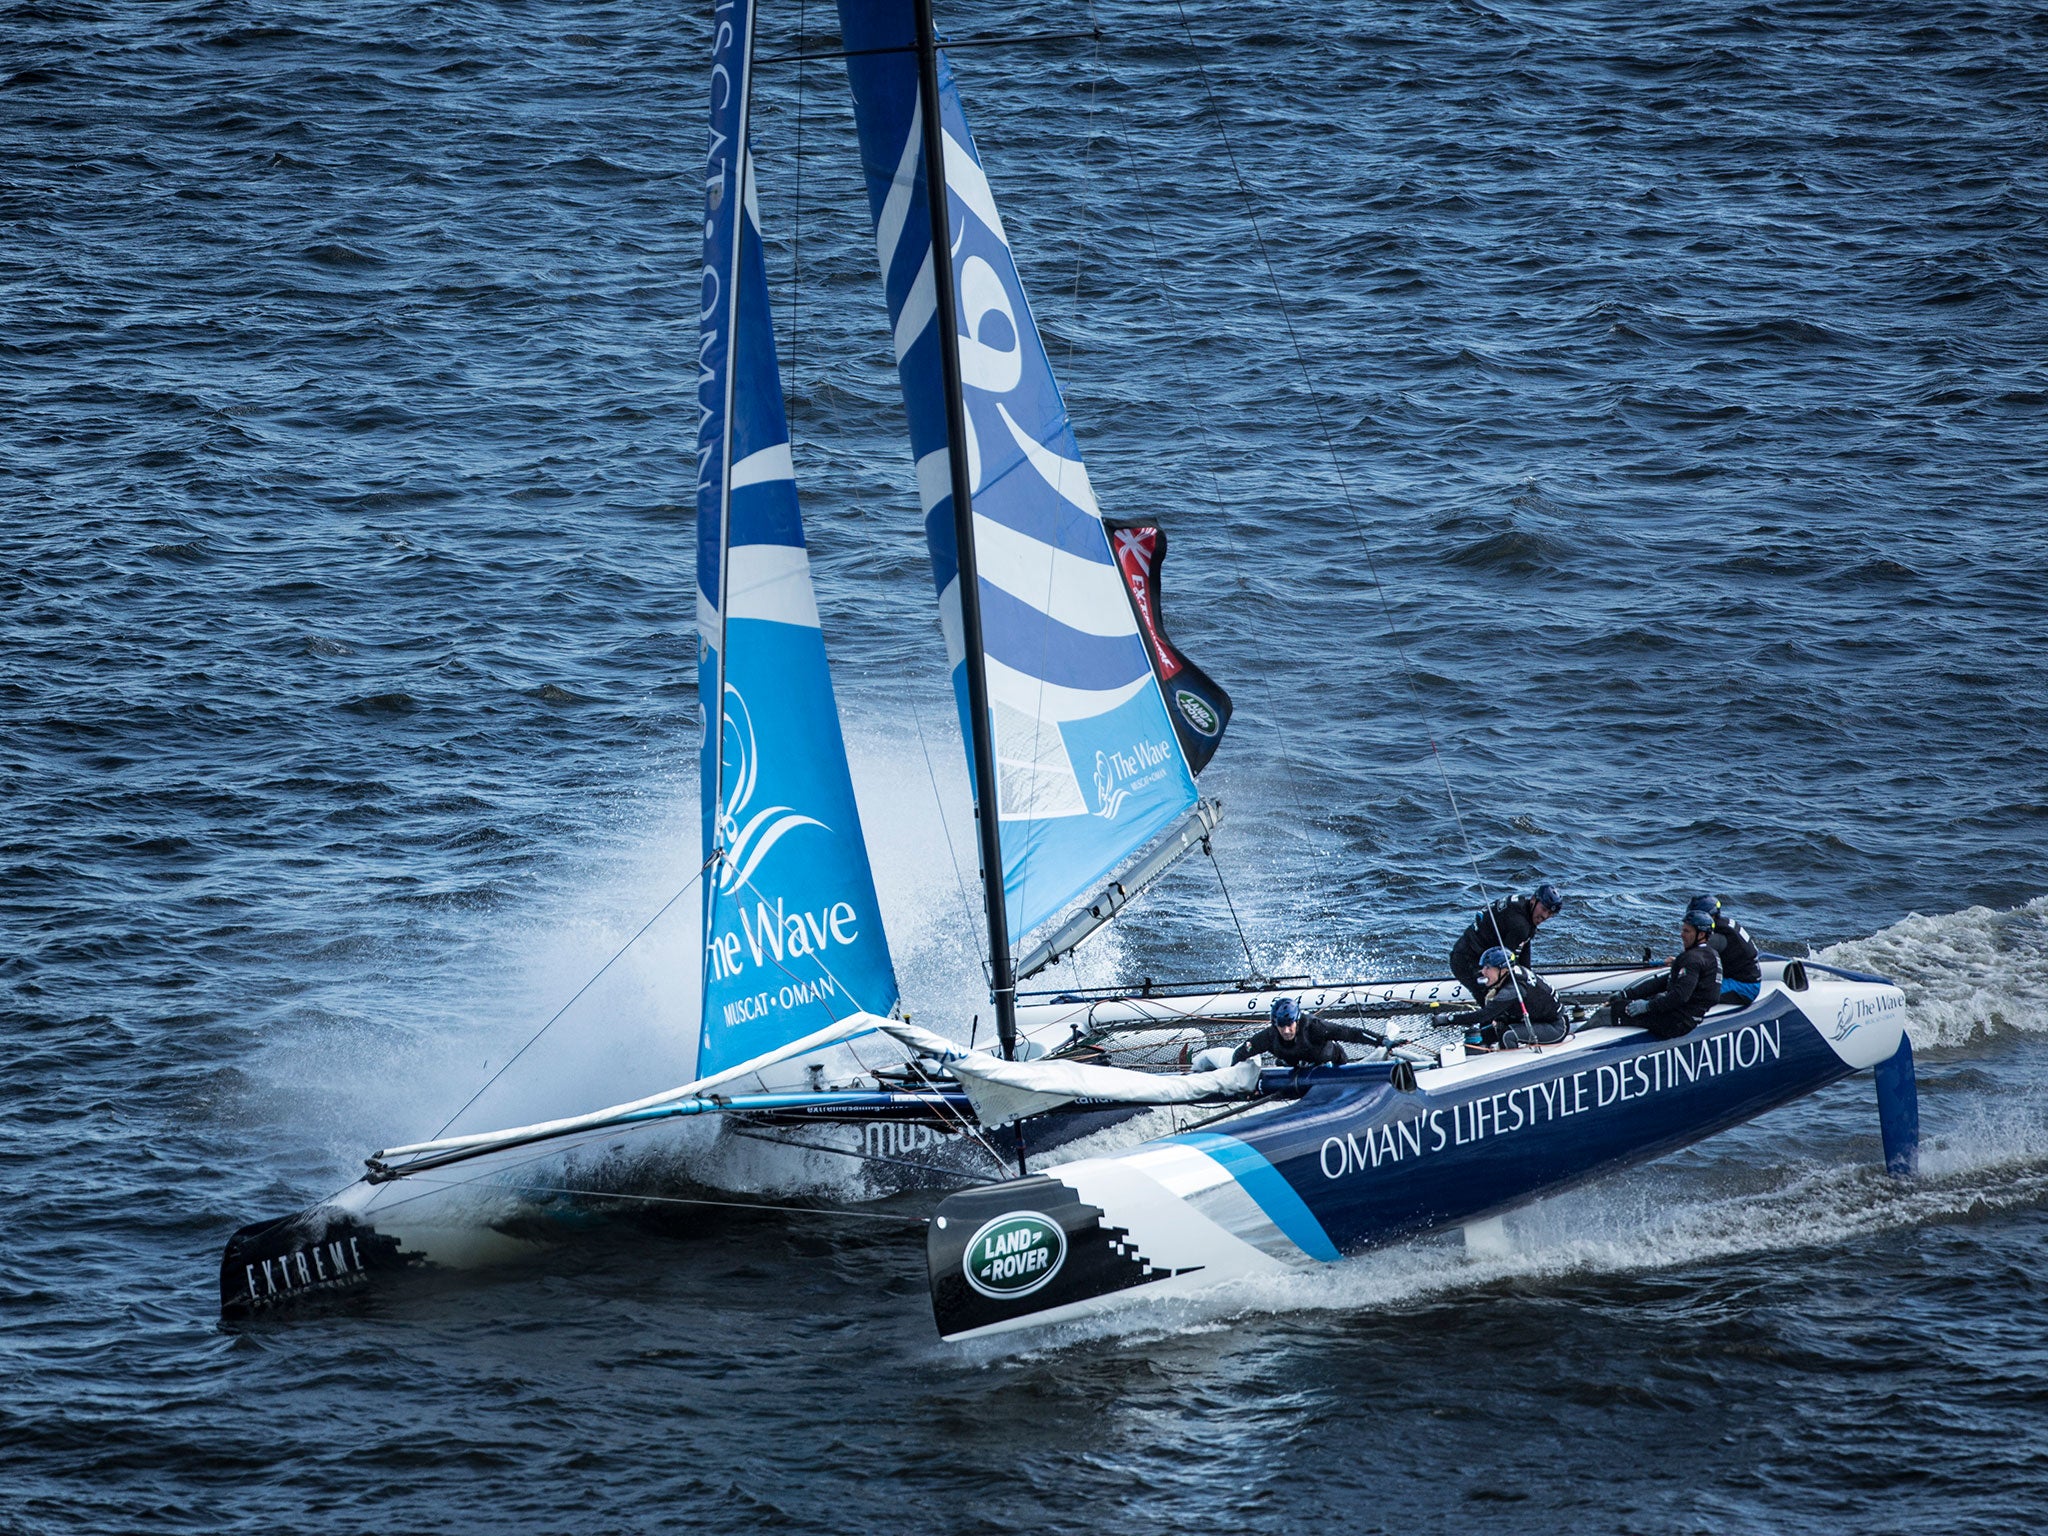 Leigh McMillan skipper of The Wave, Muscat, and a crew which includes double gold Olympic medallist Sarah Ayton had to fight all the way to win the Extreme Sailing Series